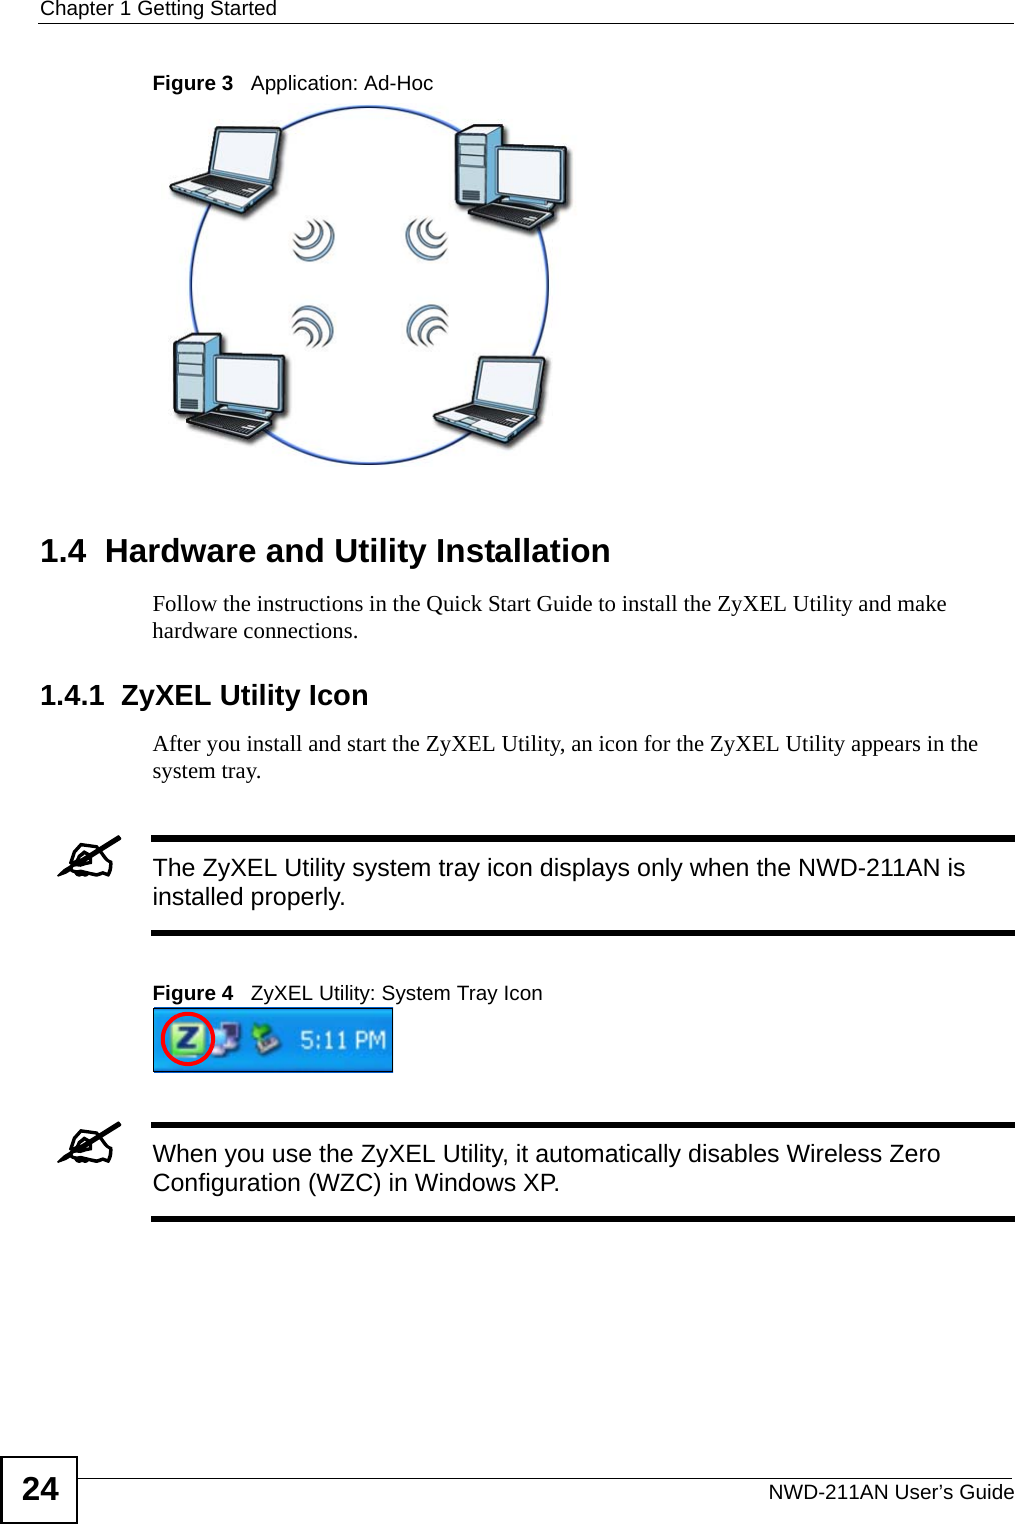 Chapter 1 Getting StartedNWD-211AN User’s Guide24Figure 3   Application: Ad-Hoc 1.4  Hardware and Utility InstallationFollow the instructions in the Quick Start Guide to install the ZyXEL Utility and make hardware connections.1.4.1  ZyXEL Utility IconAfter you install and start the ZyXEL Utility, an icon for the ZyXEL Utility appears in the system tray.&quot;The ZyXEL Utility system tray icon displays only when the NWD-211AN is installed properly.Figure 4   ZyXEL Utility: System Tray Icon &quot;When you use the ZyXEL Utility, it automatically disables Wireless Zero Configuration (WZC) in Windows XP.